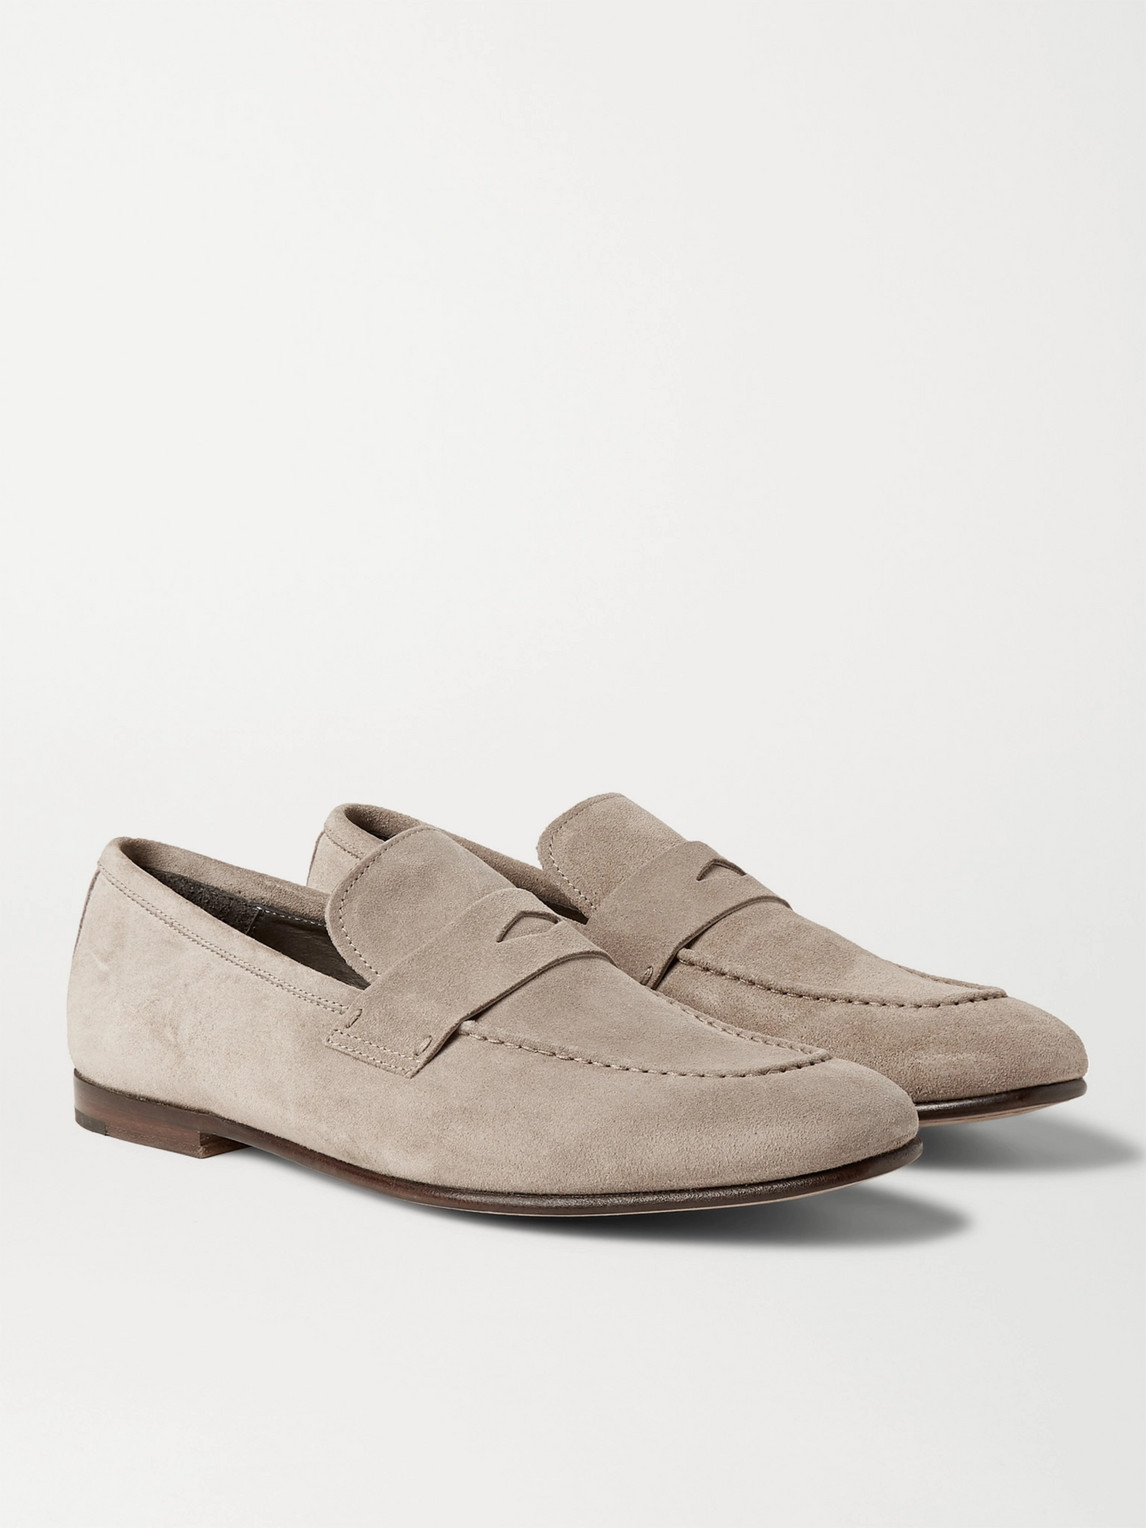 DUNHILL CHILTERN SUEDE PENNY LOAFERS